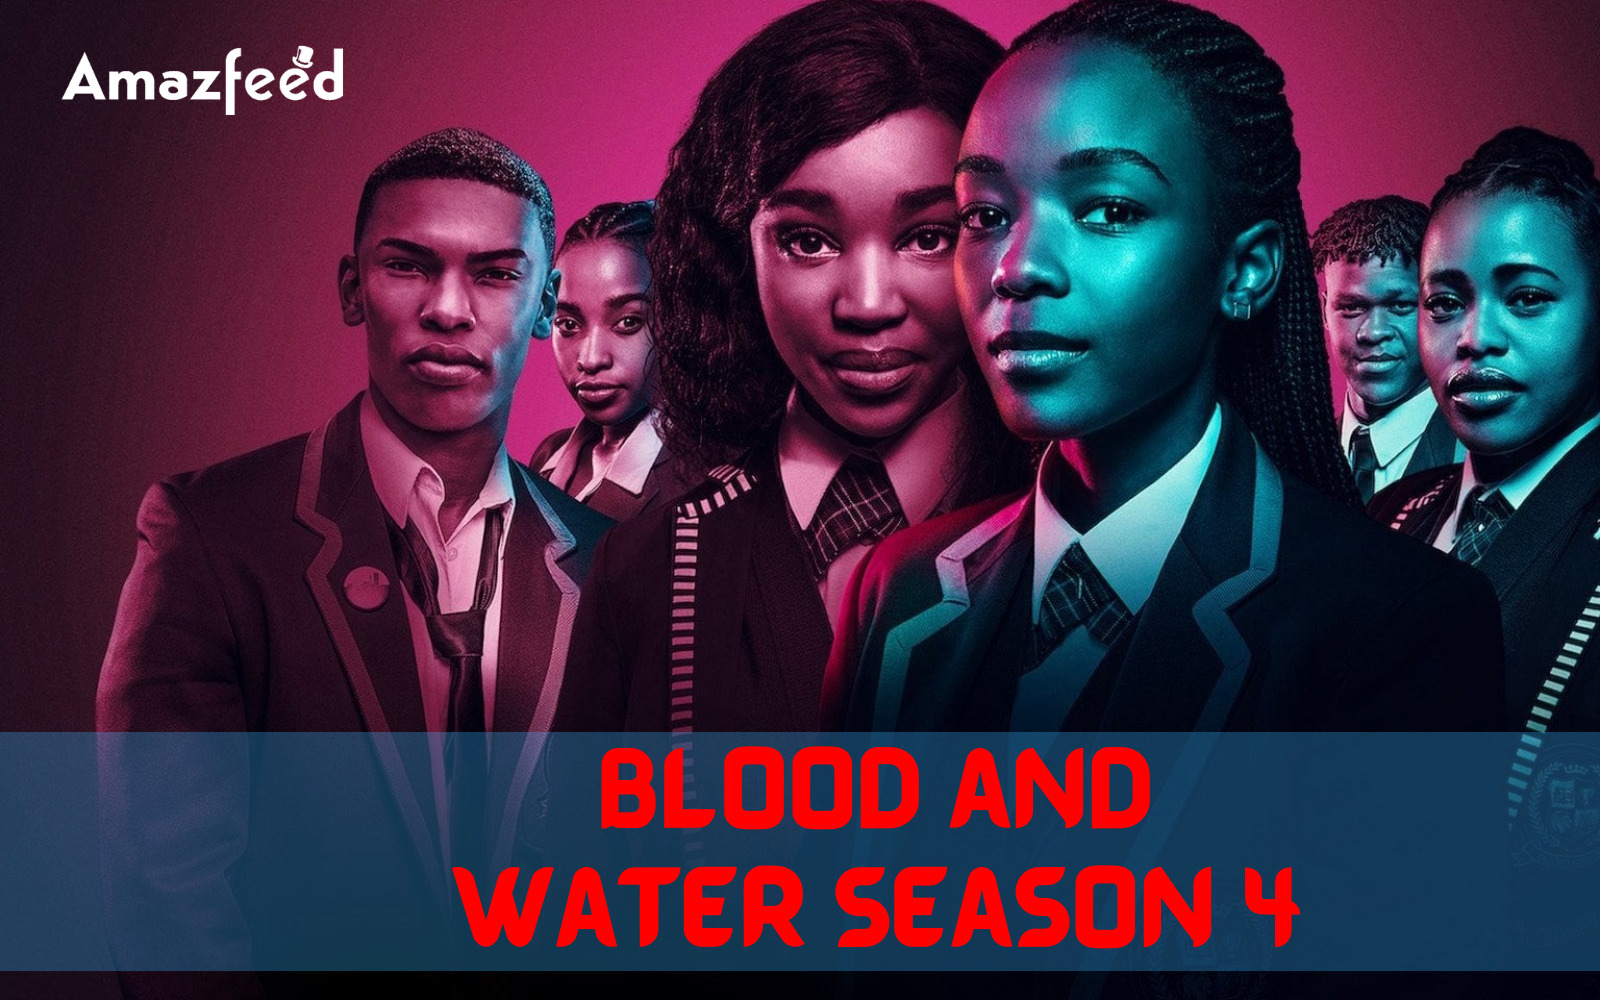 Who Will Be Part Of Blood and water Season 4 (cast and character)